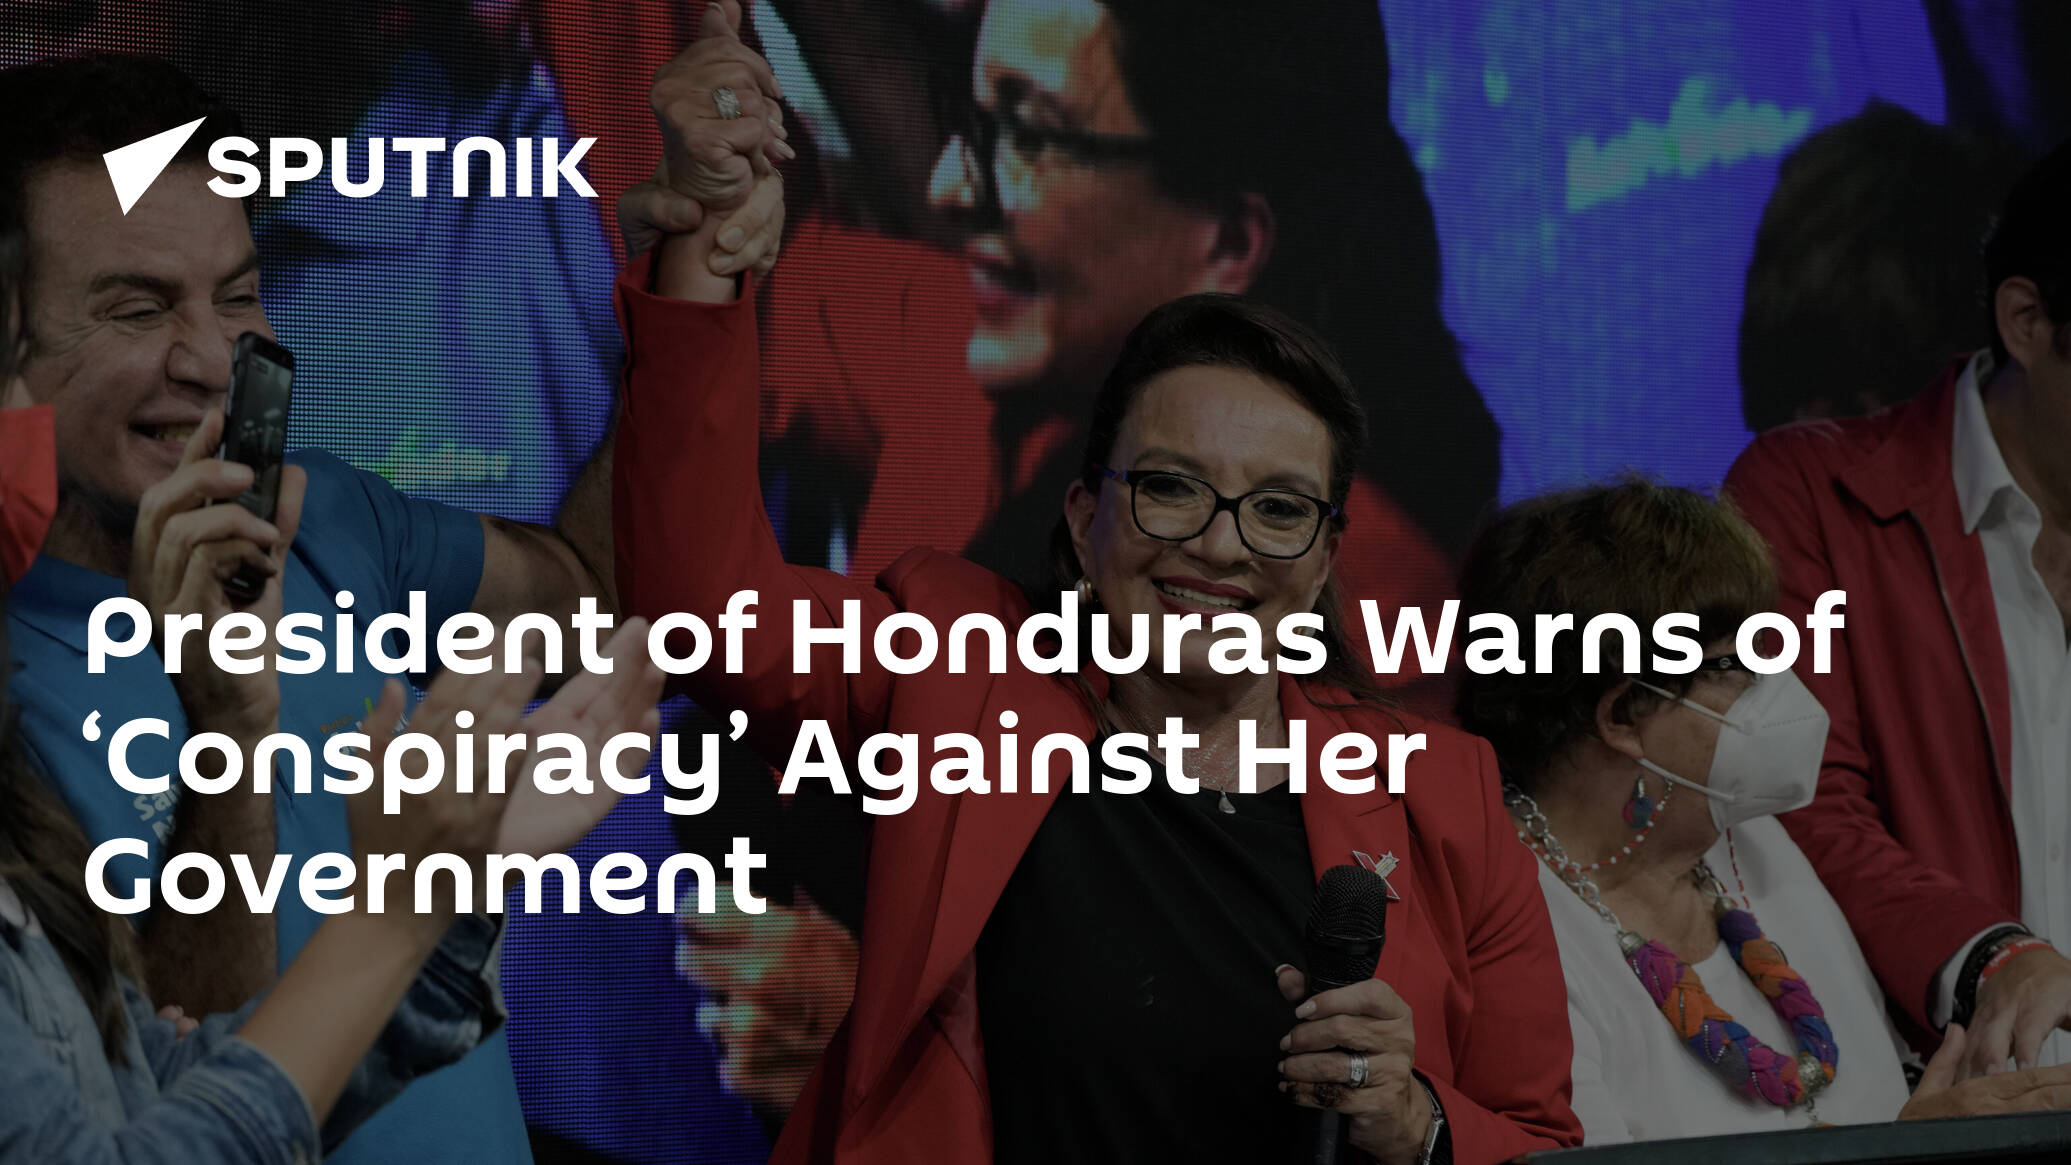 President of Honduras Warns of ‘Conspiracy’ Against Her Government